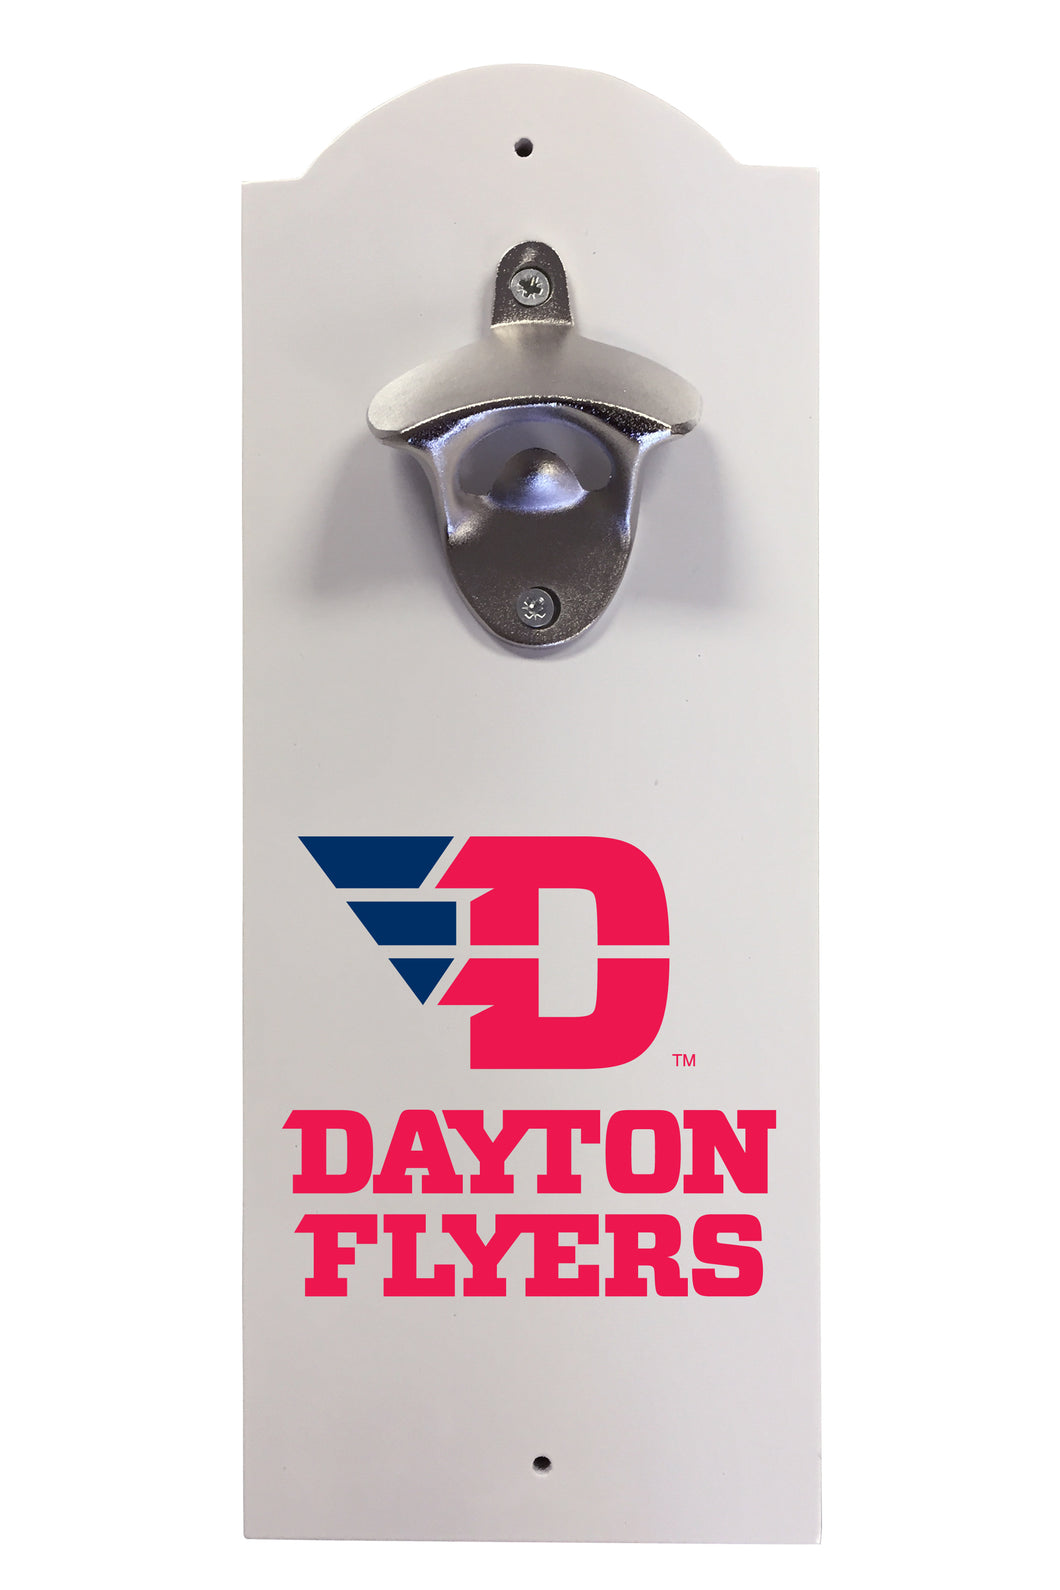 Dayton Flyers Wall-Mounted Bottle Opener – Sturdy Metal with Decorative Wood Base for Home Bars, Rec Rooms & Fan Caves